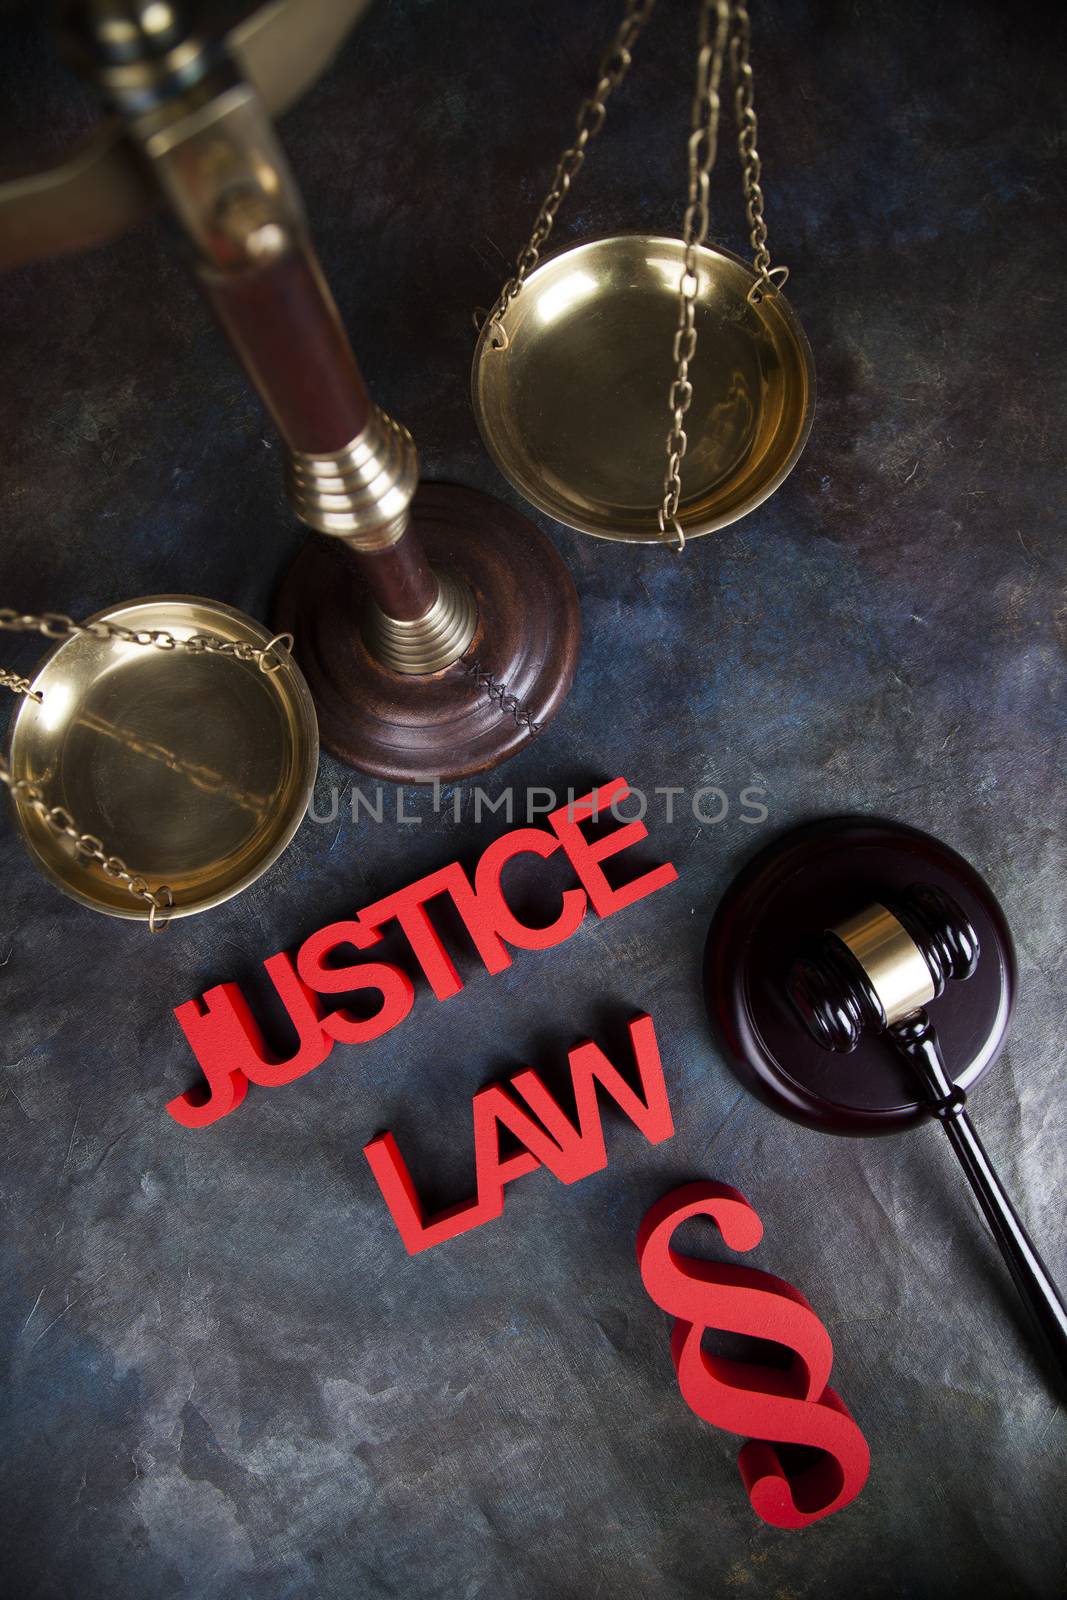 Judges wooden gavel, on wooden table background